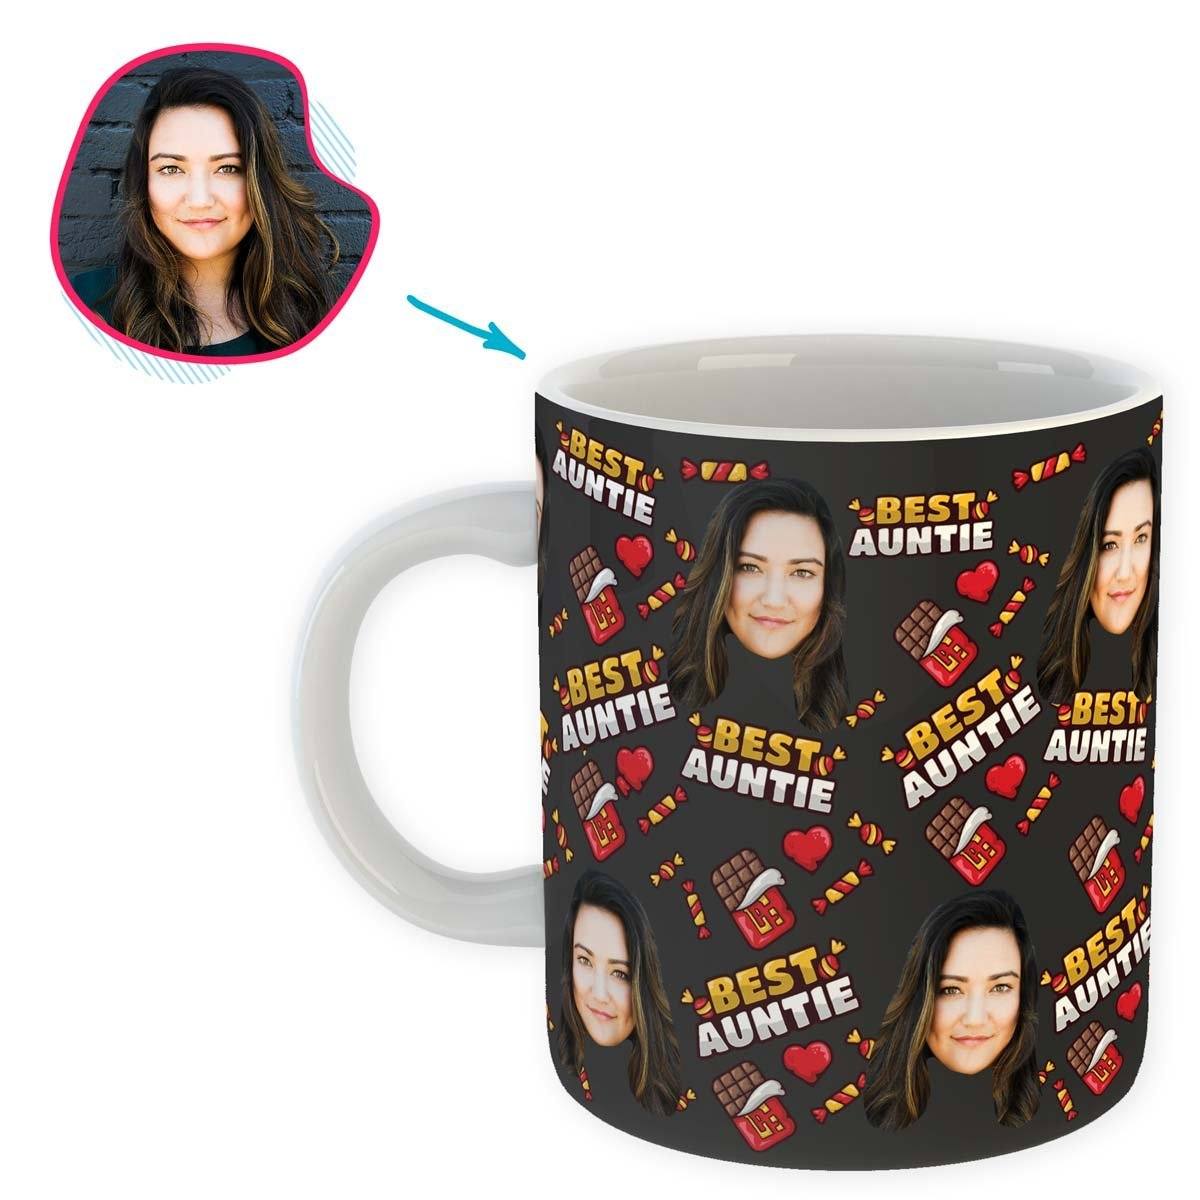 Dark Auntie personalized mug with photo of face printed on it